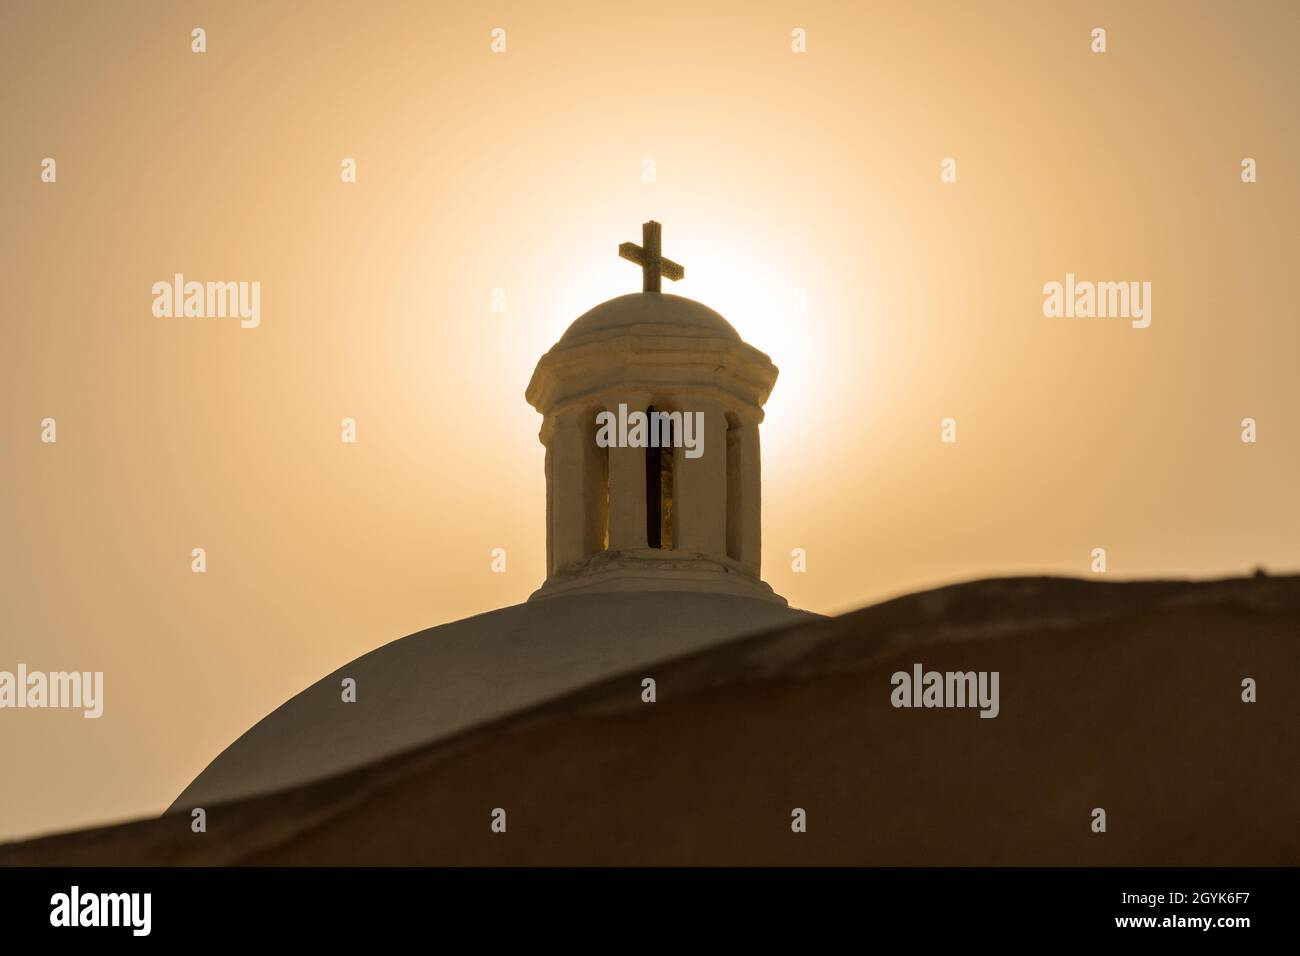 The cross on the dome of the church of the Mission of San Jose de Tumacacori.  Tumacacori National Historical Park Stock Photo